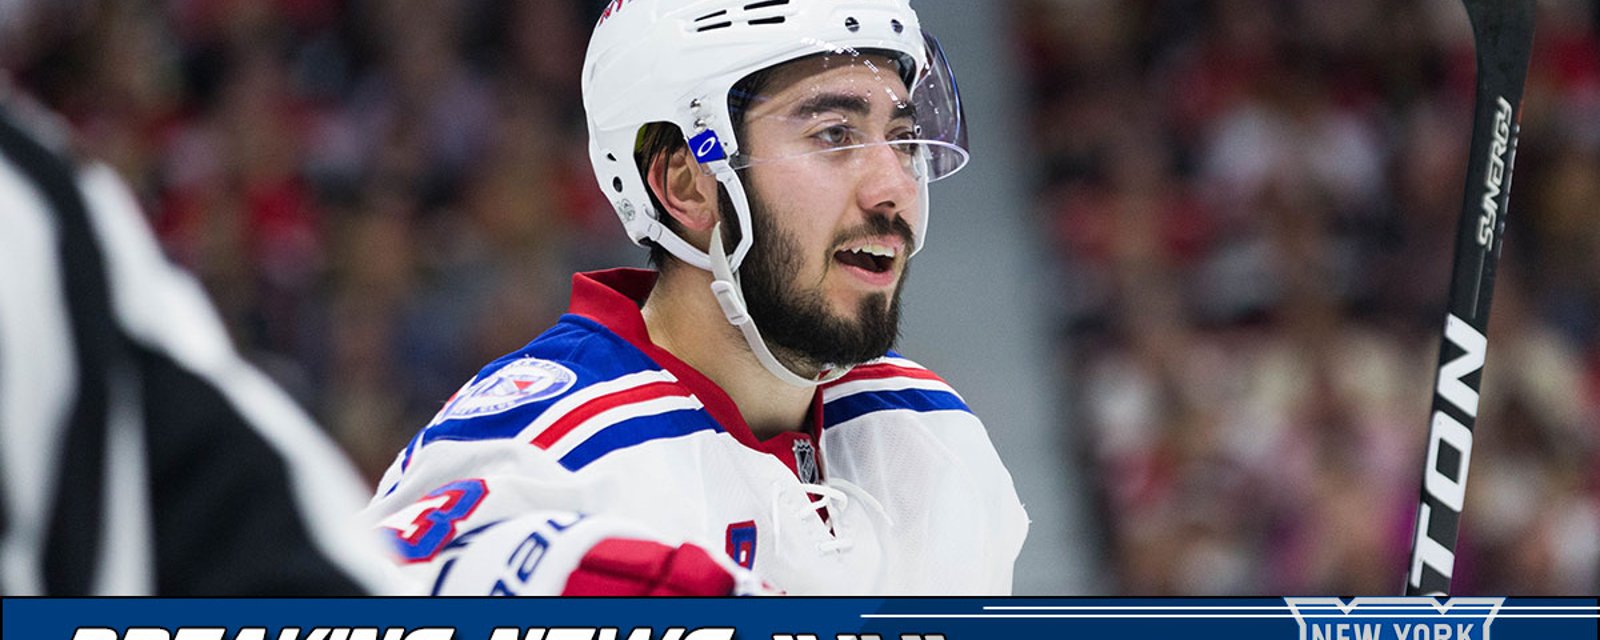 Breaking: Vigneault lashes out at Zibanejad with strong criticism